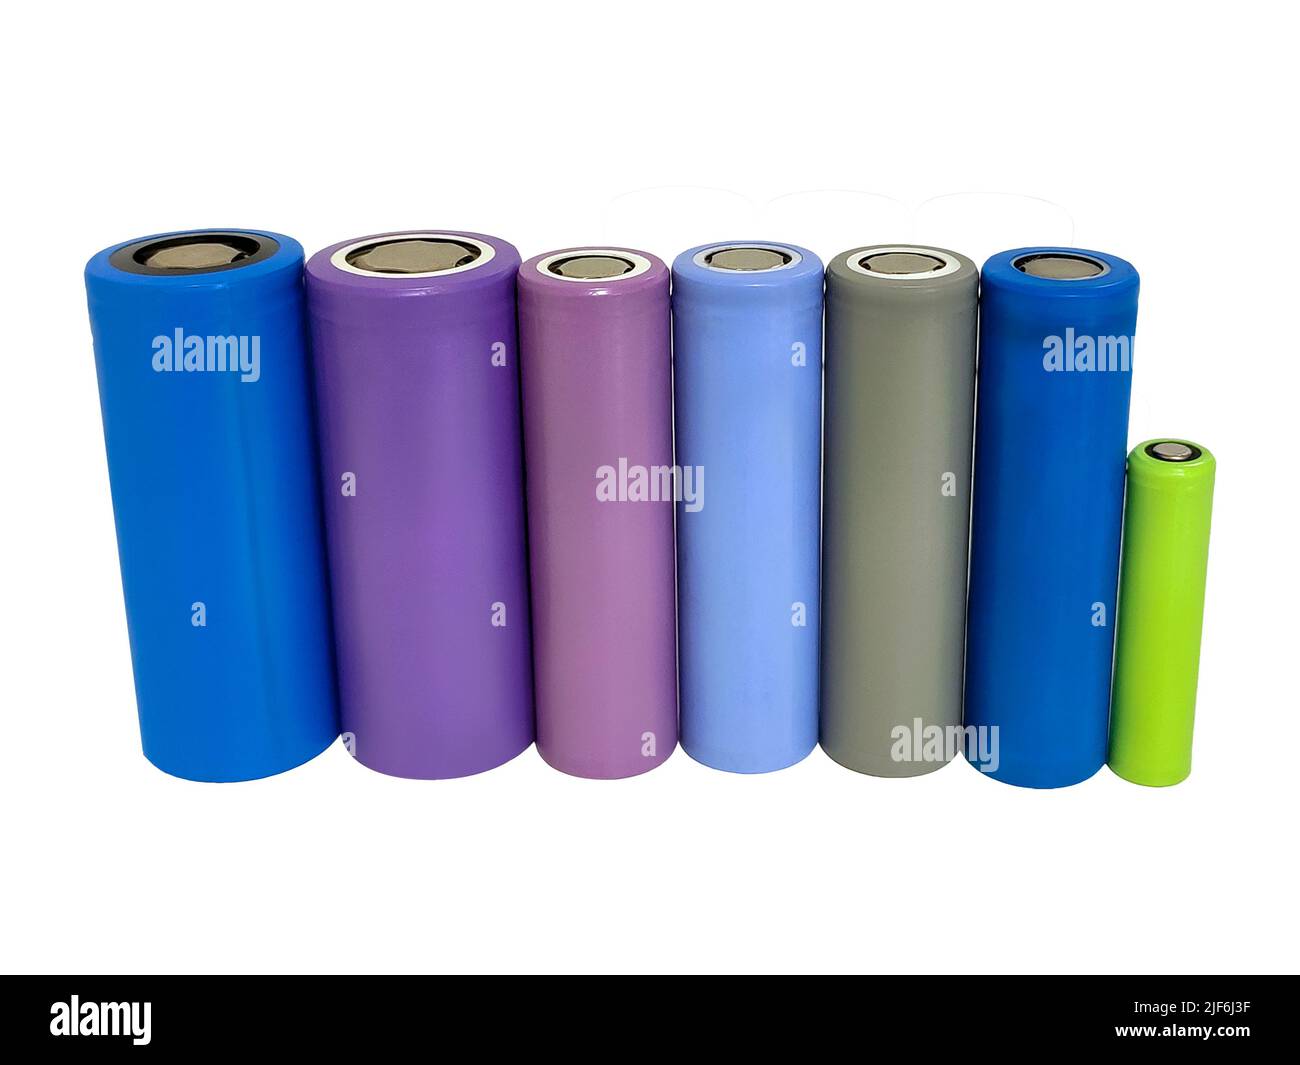 https://c8.alamy.com/comp/2JF6J3F/rechargeable-lithium-iron-phosphate-lifepo4-or-lfp-lithium-ferro-phosphate-cells-on-white-background-lifepo-4-batteries-green-power-energy-2JF6J3F.jpg